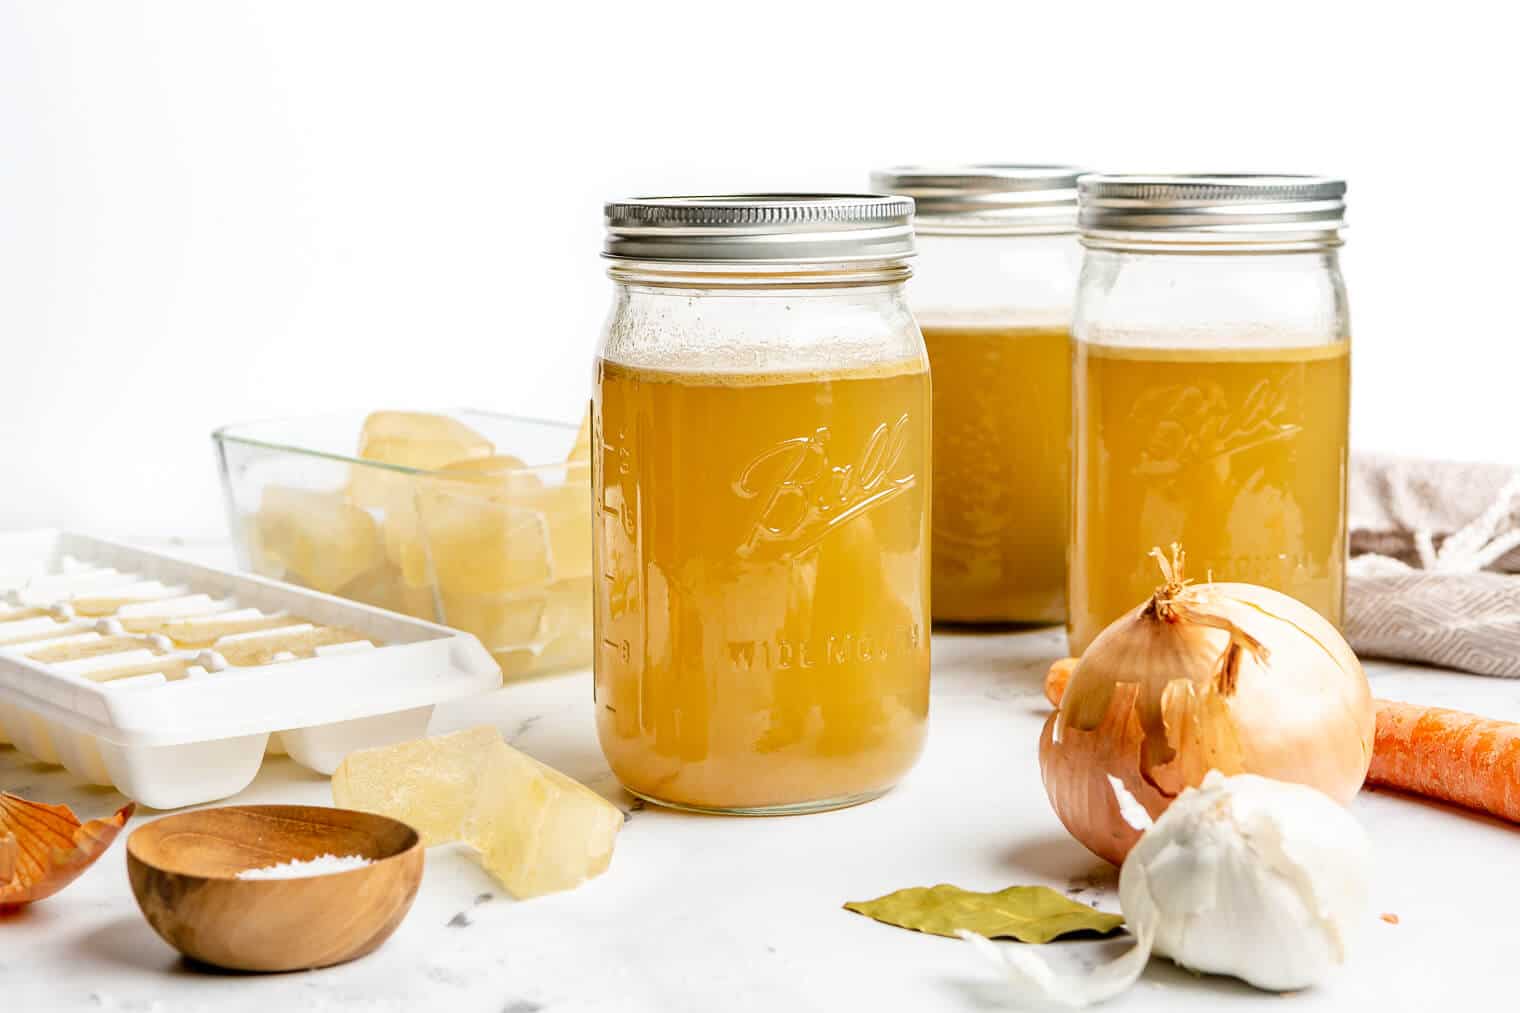 3 large mason jars of homemade chicken broth sitting on a marble countertop next to frozen ice cubes of chicken broth, an onion, a bulb of garlic, a carrot, and a small bowl of salt.